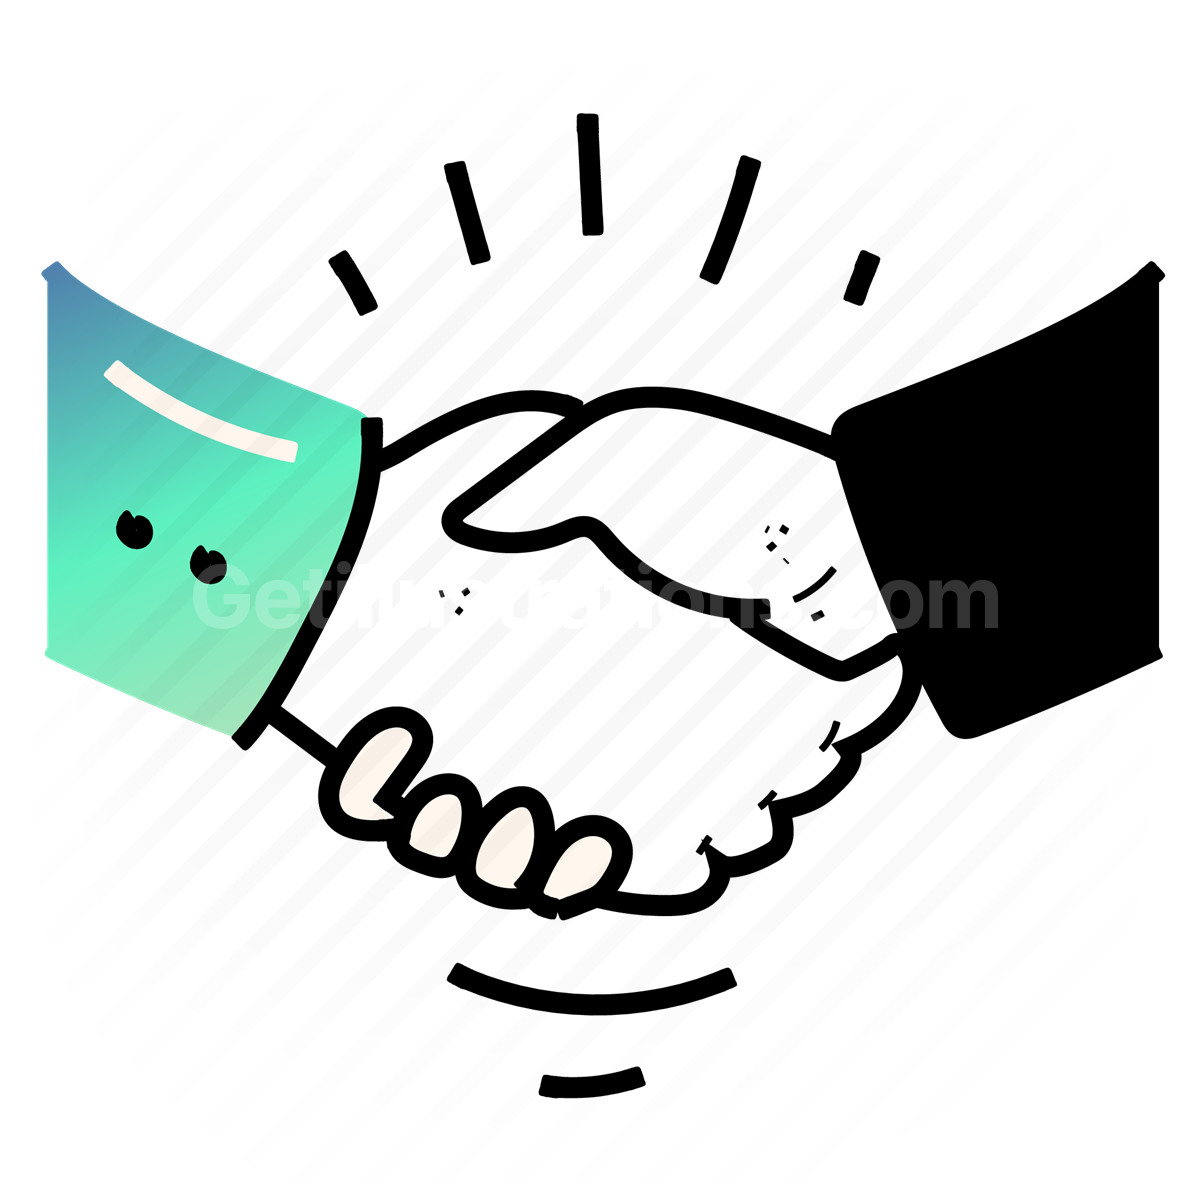 agreement, deal, contract, hand gesture, communication